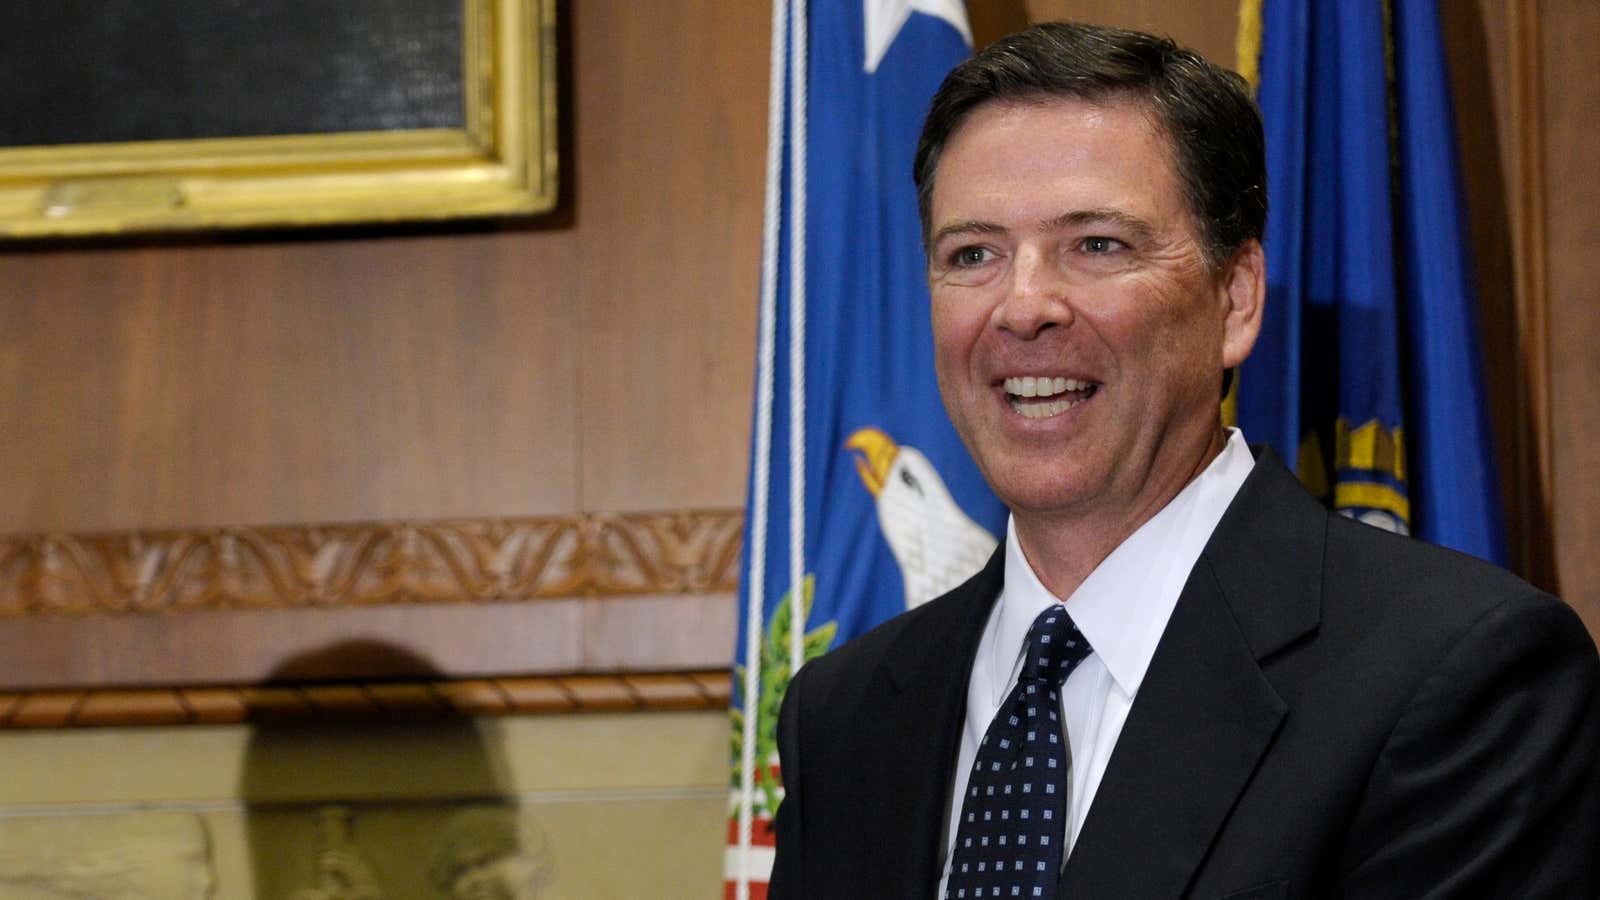 FBI director James Comey is suddenly sitting on $1.2 billion in cryptocurrency